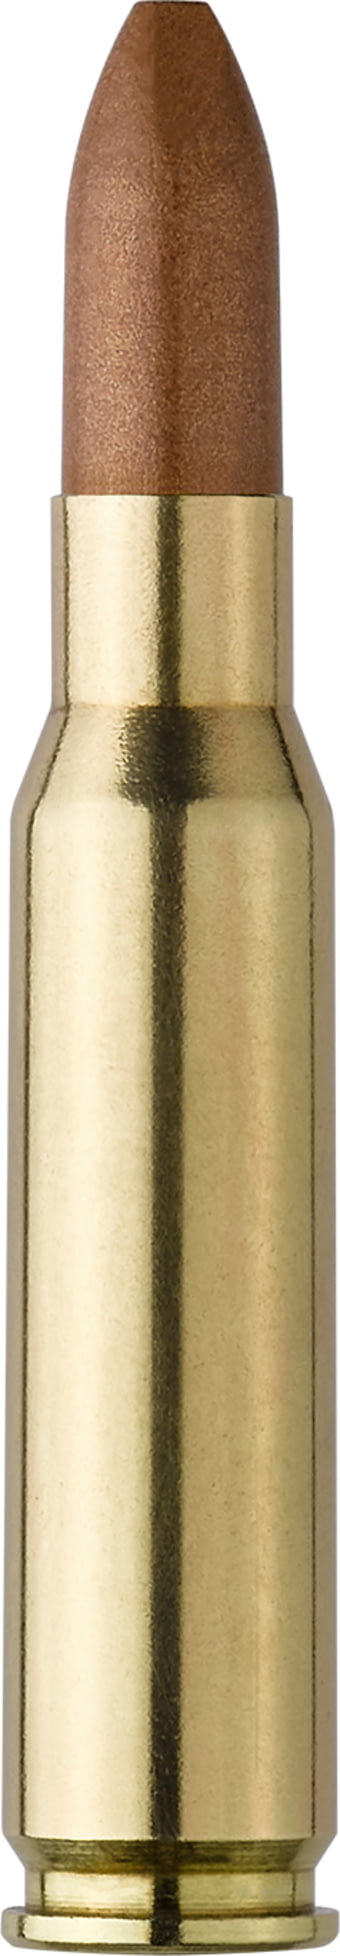 Norma Range Training Frangible .308 Winchester 133 Grain Norma Frangible Brass Cased Centerfire Rifle Ammunition